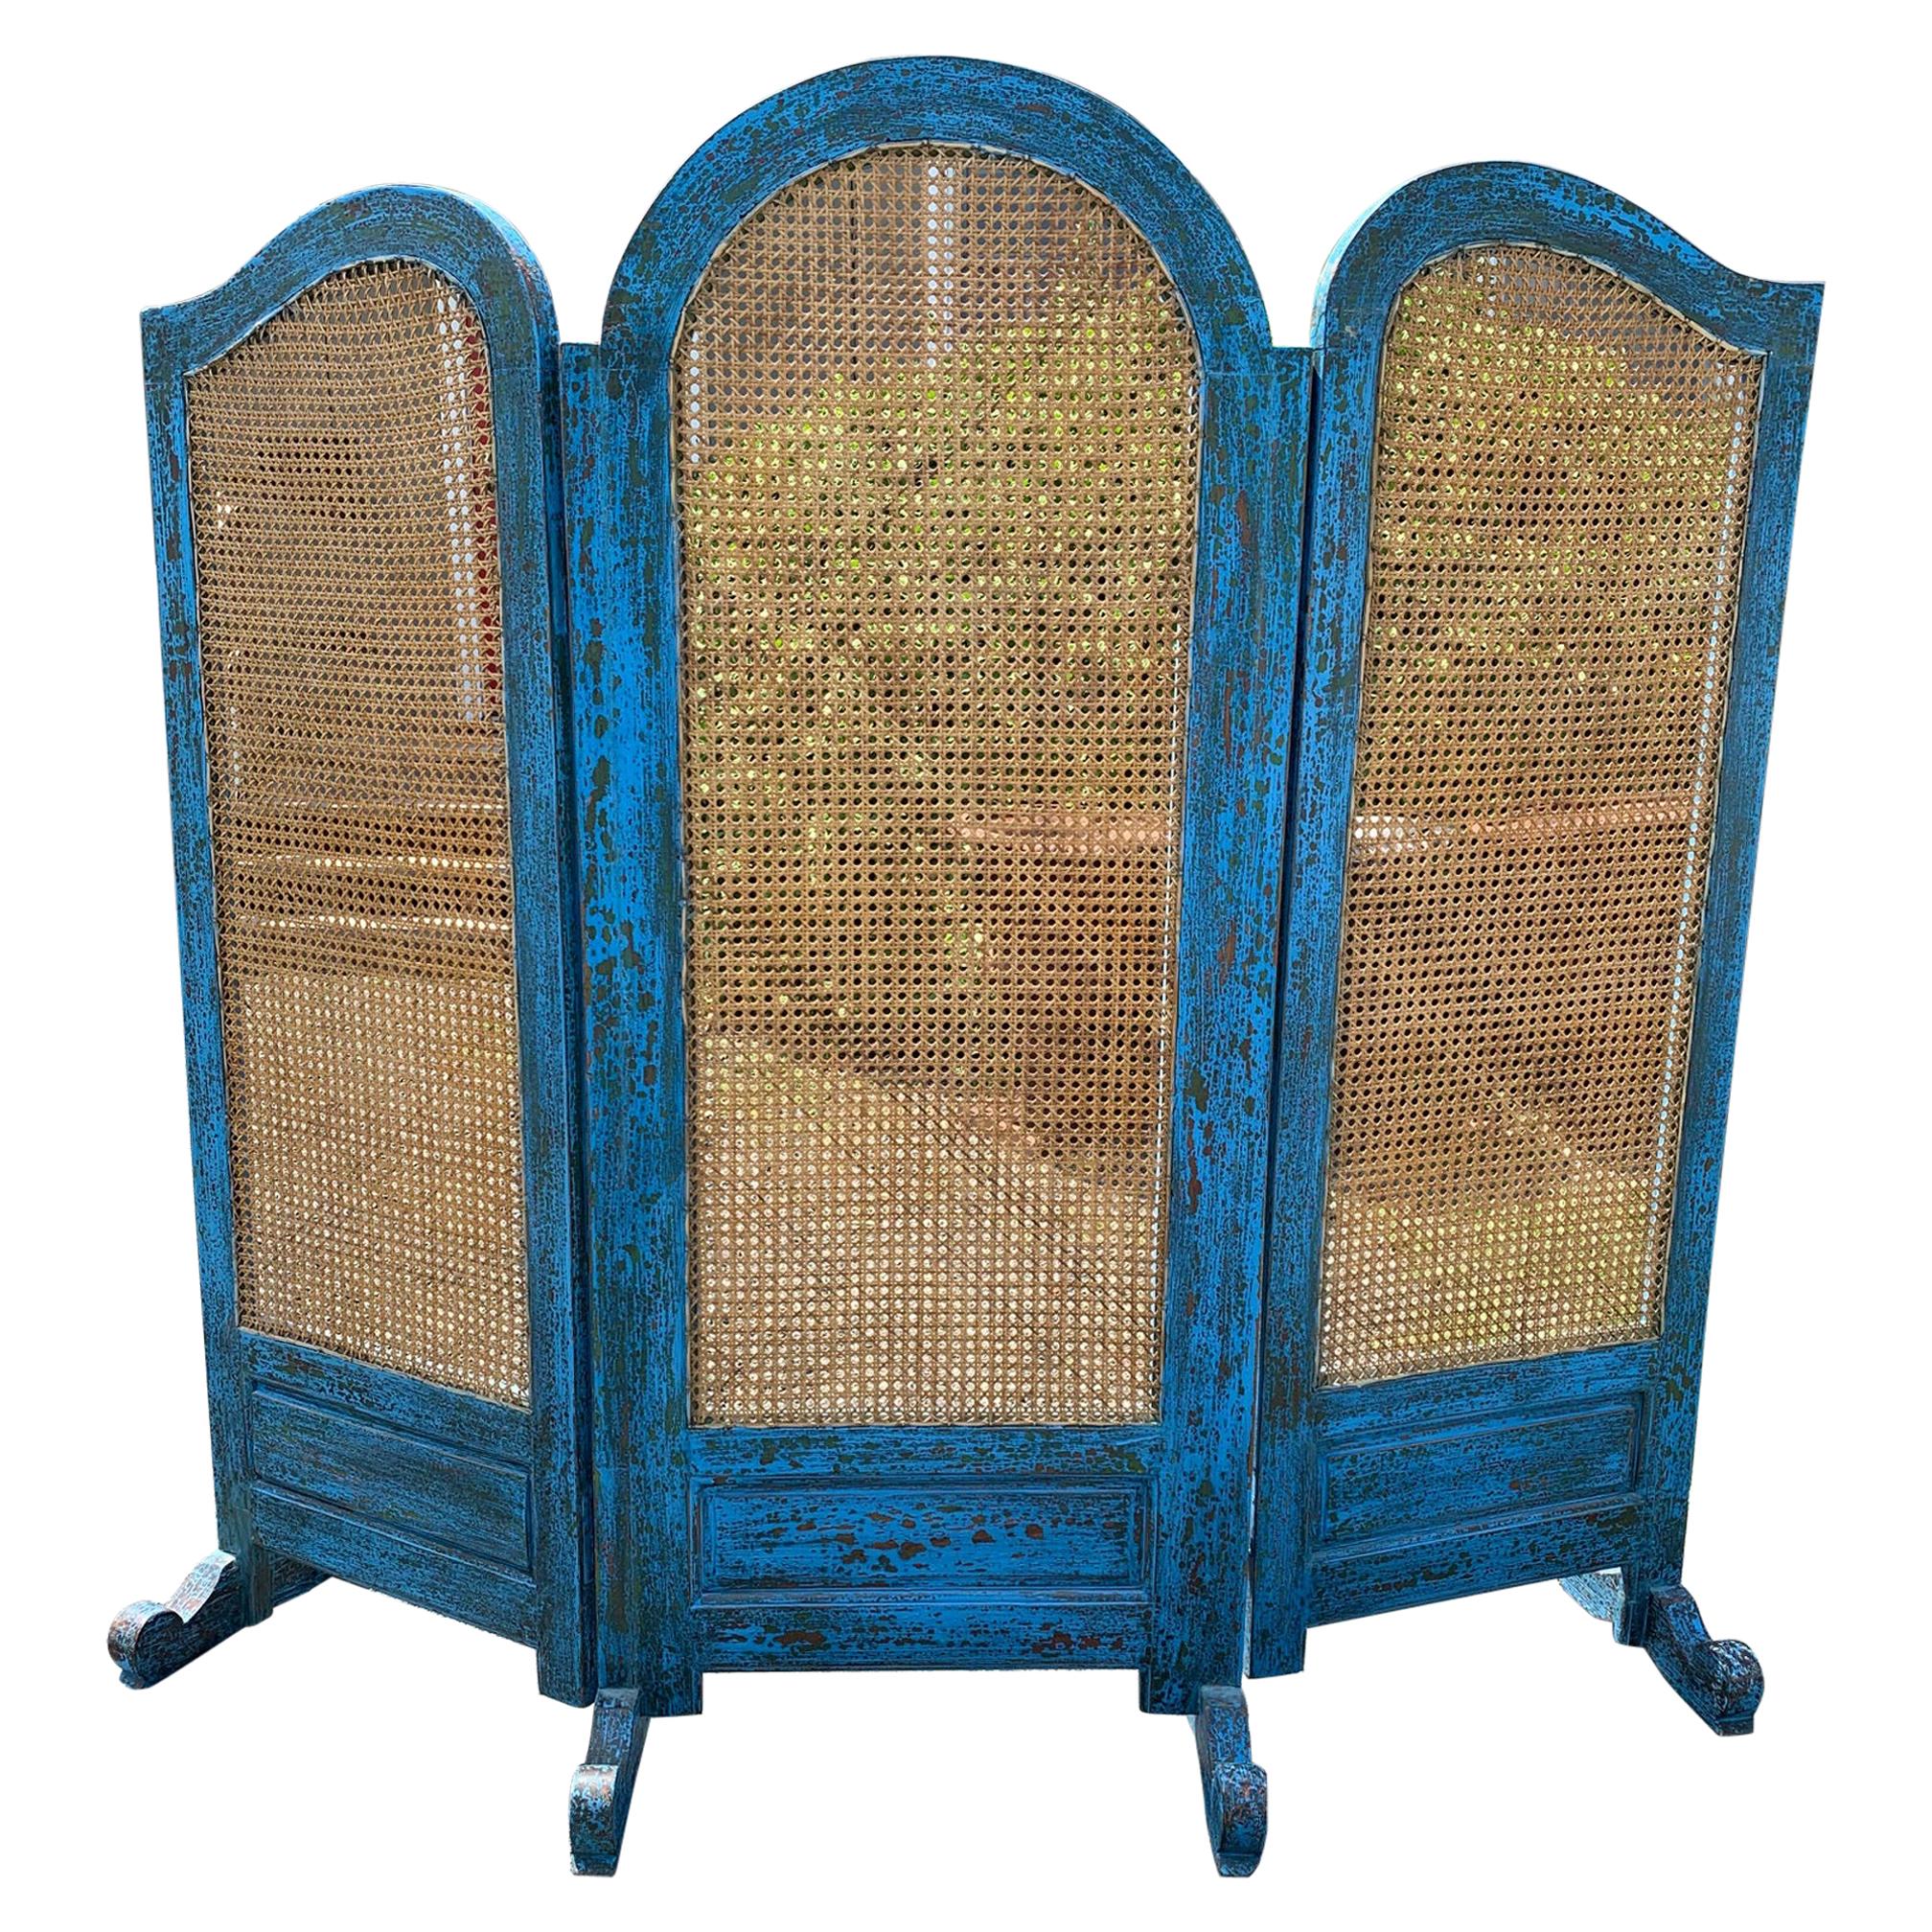 Sensational Turquoise Scrubbed Wood and Caned 3 Panel Screen For Sale